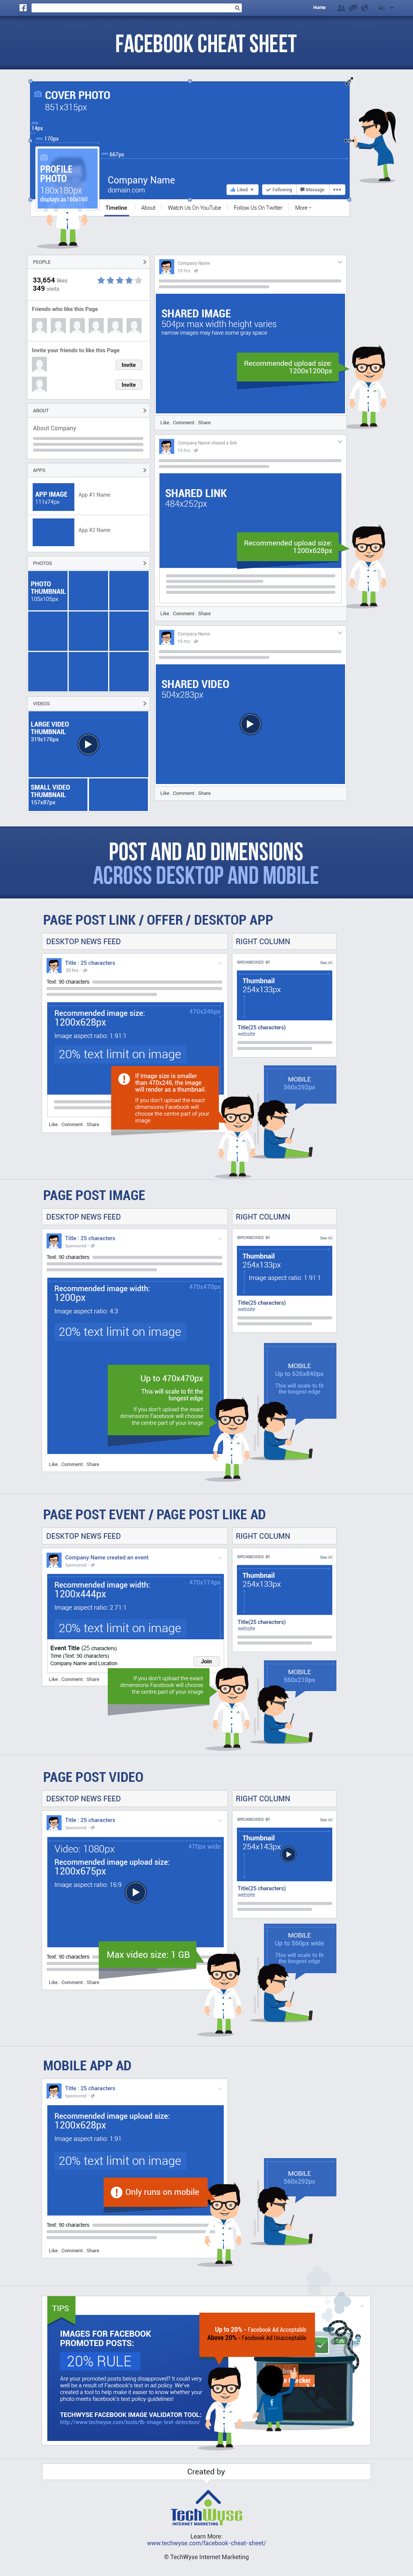 Viewing Infographic of Dimension Facebook Cheat Sheet: Image Size and Dimensions | Infographics ...